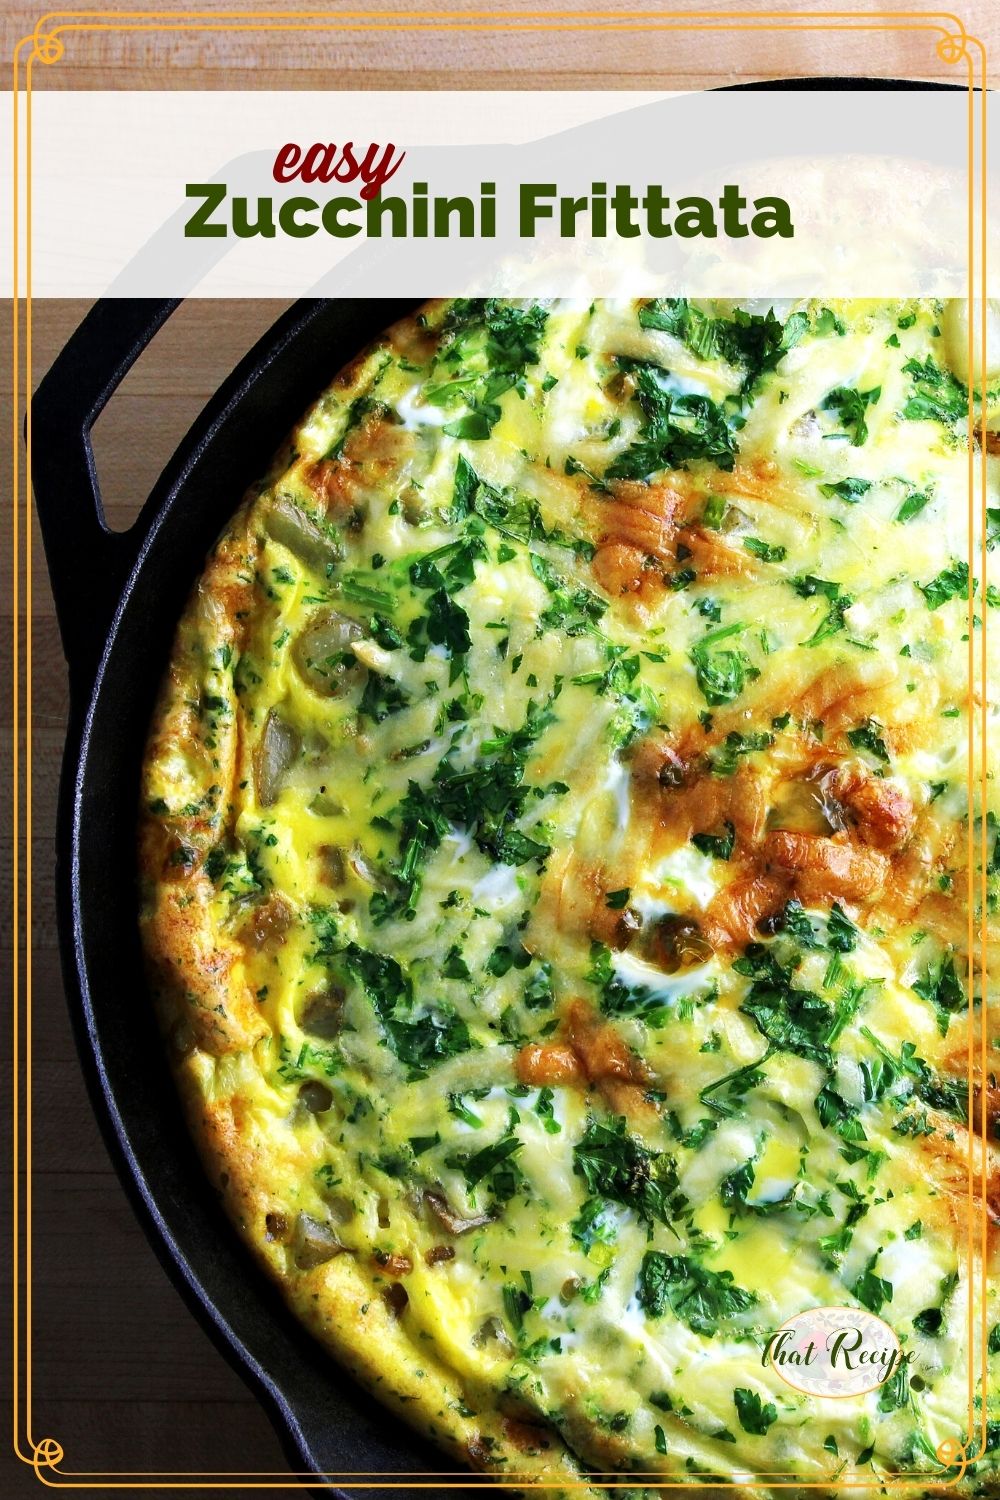 Easy Zucchini Frittata Makes Brunch Special